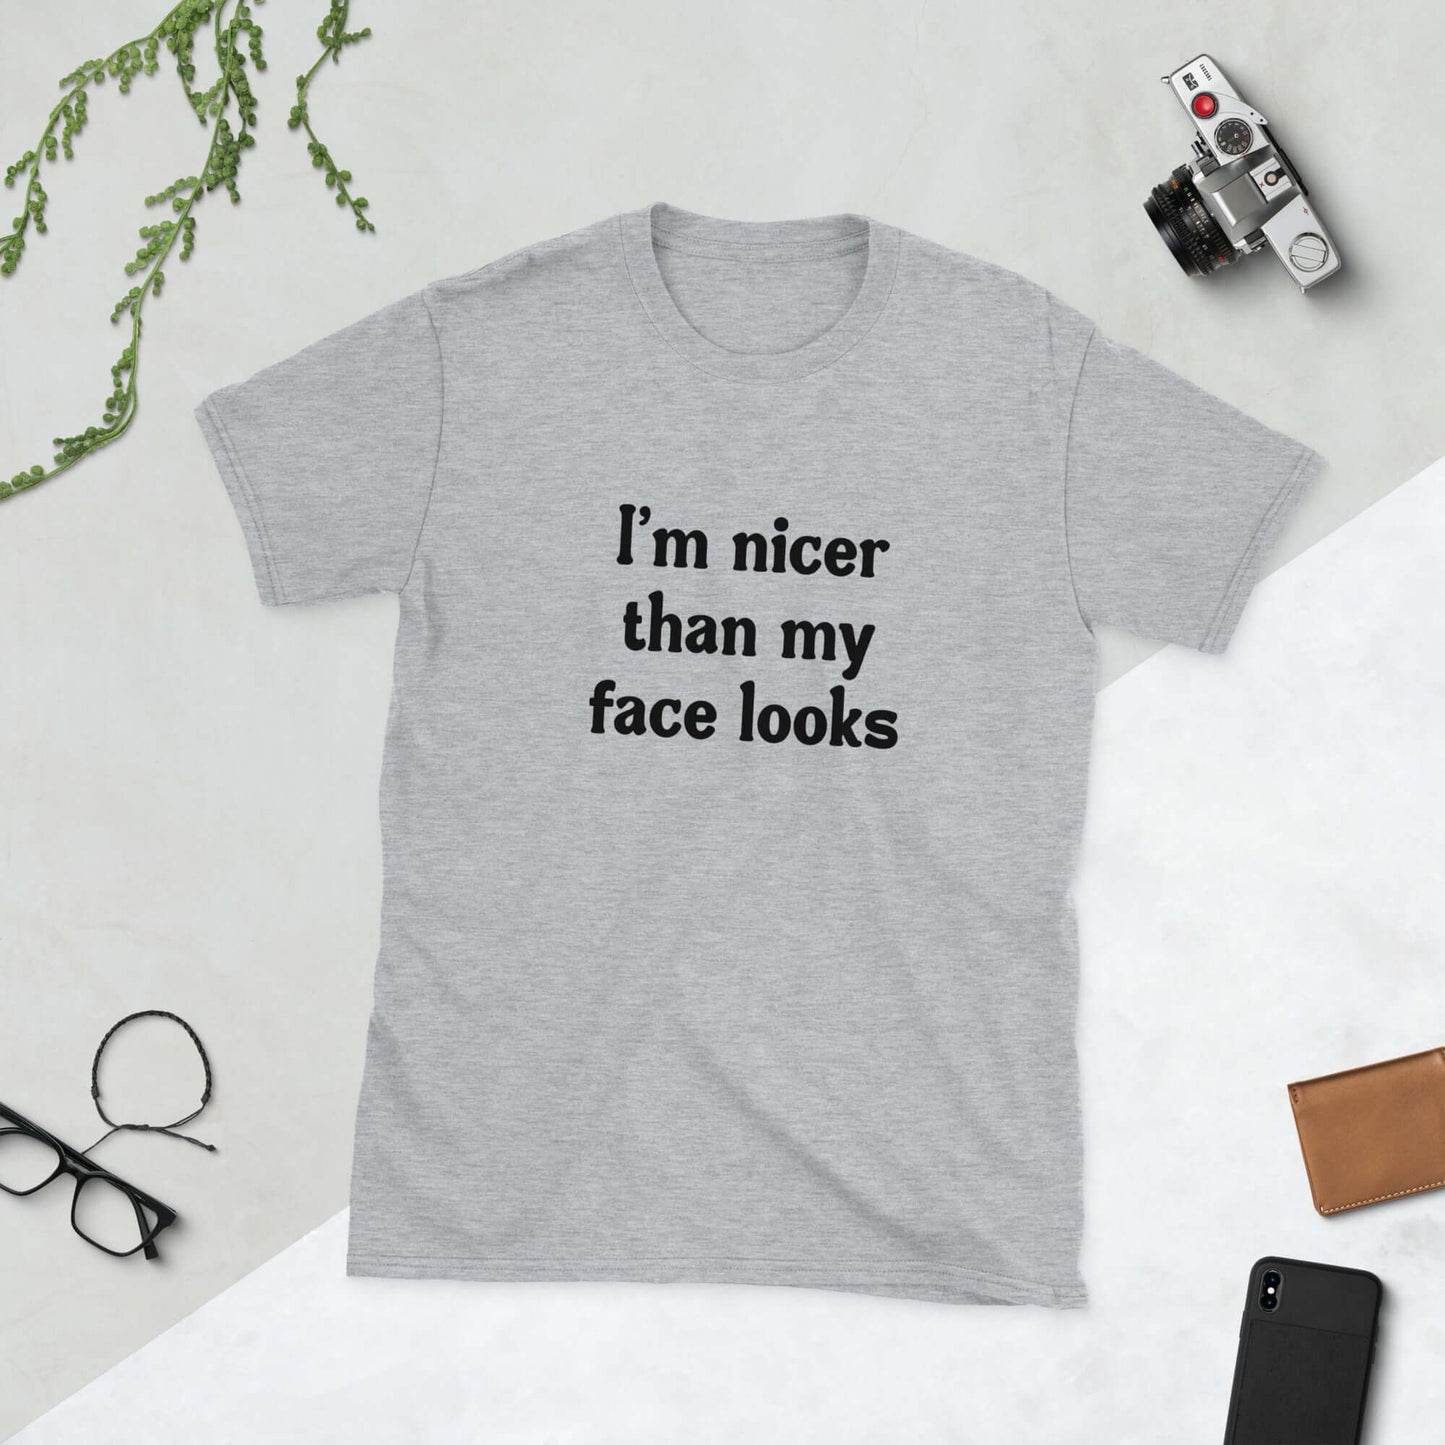 Sport grey t-shirt that says I'm nicer than my face looks printed on the front.